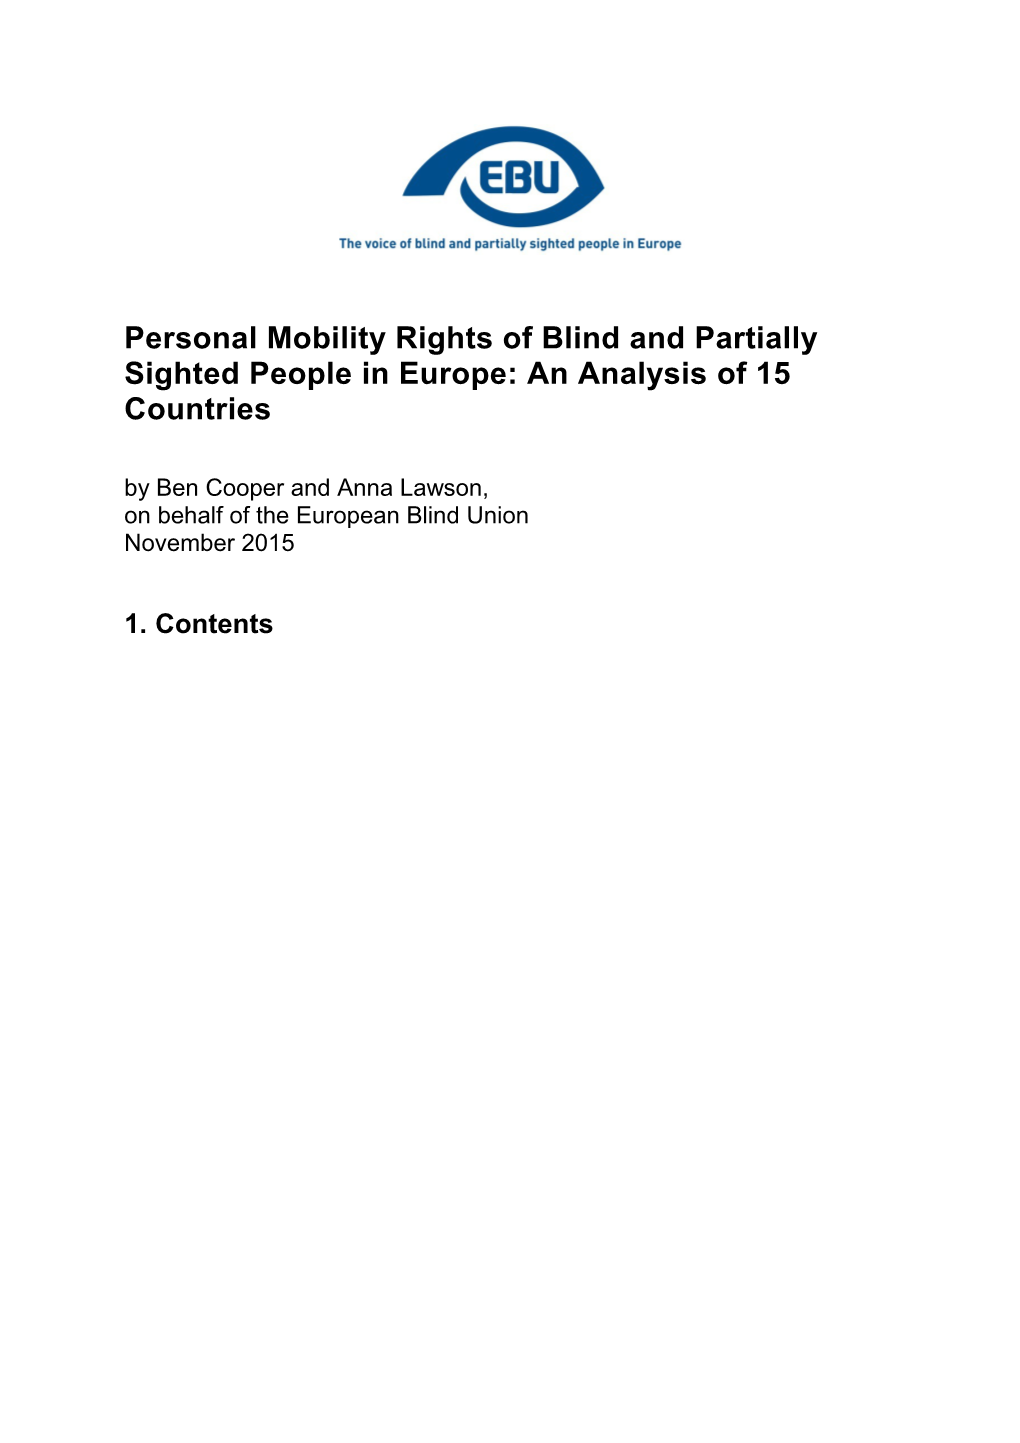 Personal Mobility Rights of Blind and Partially Sighted People in Europe: an Analysis